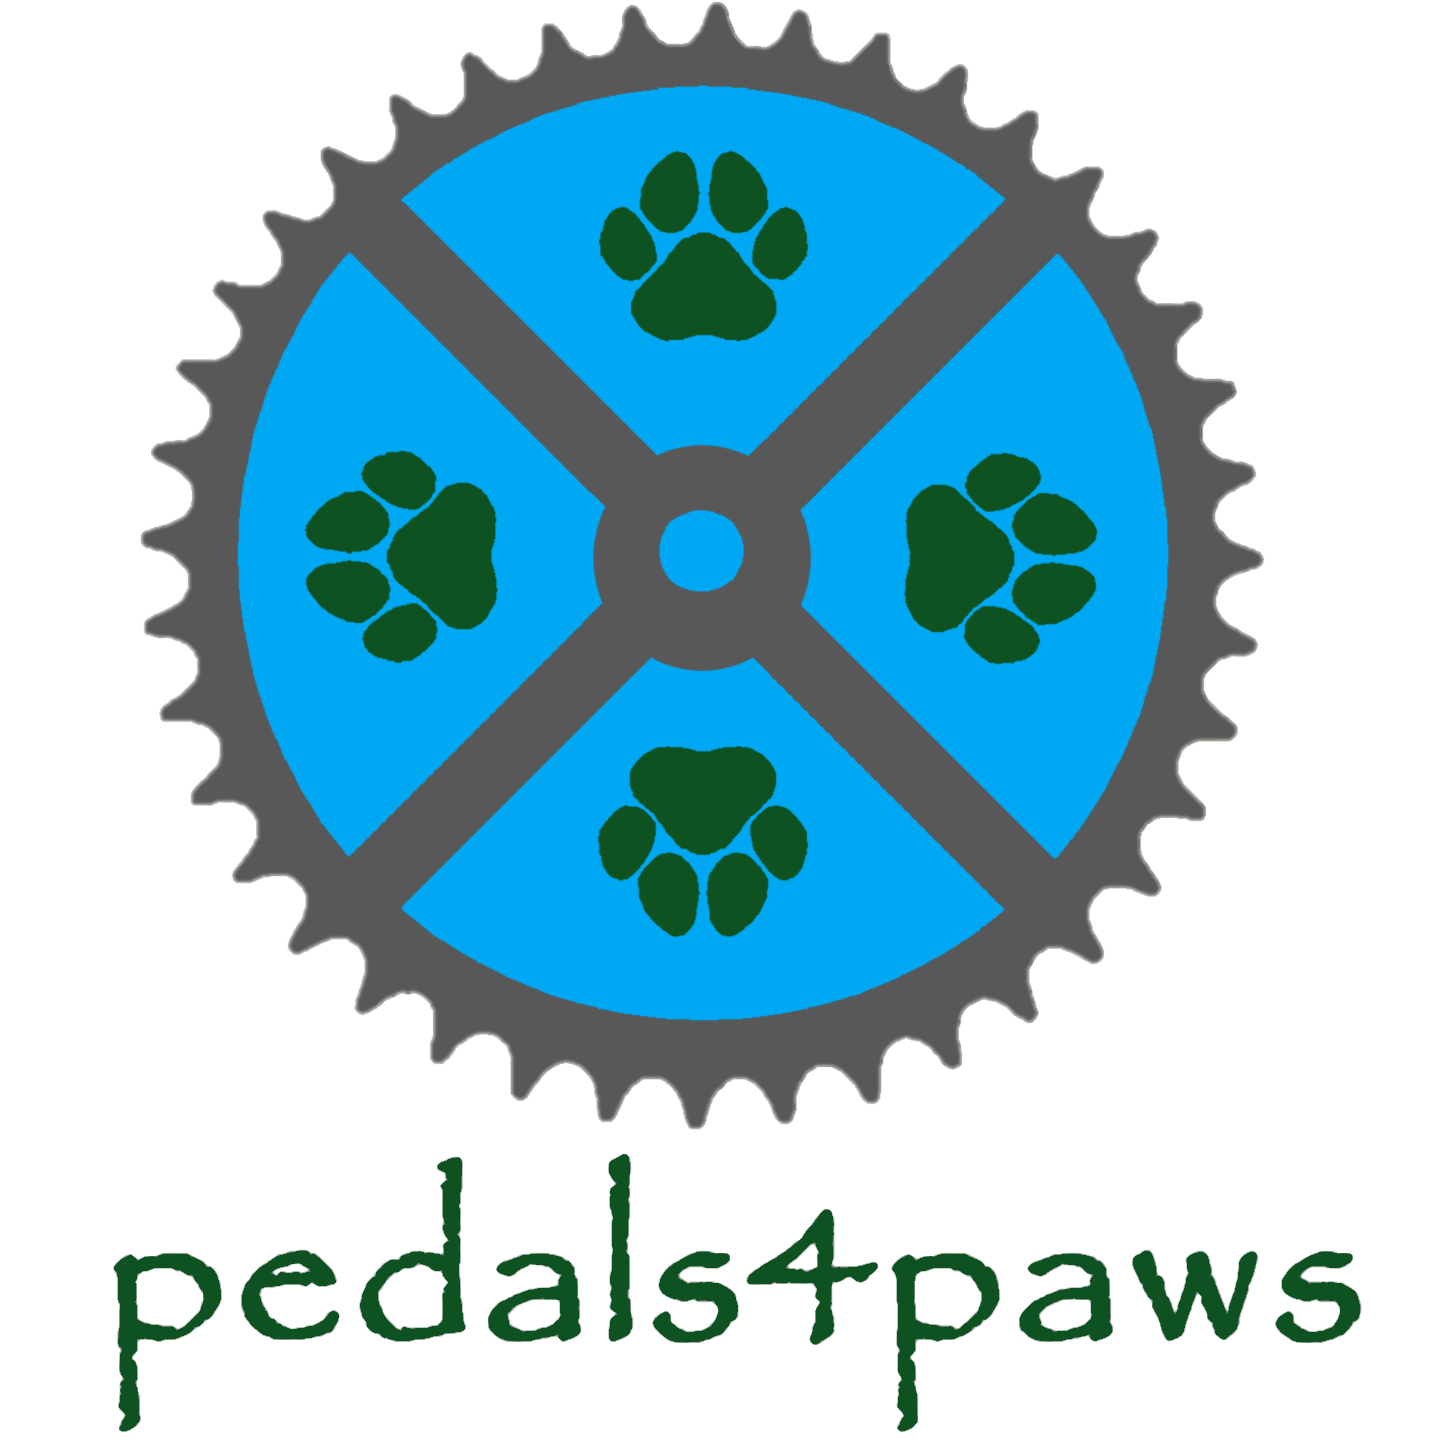 Pedals4Paws